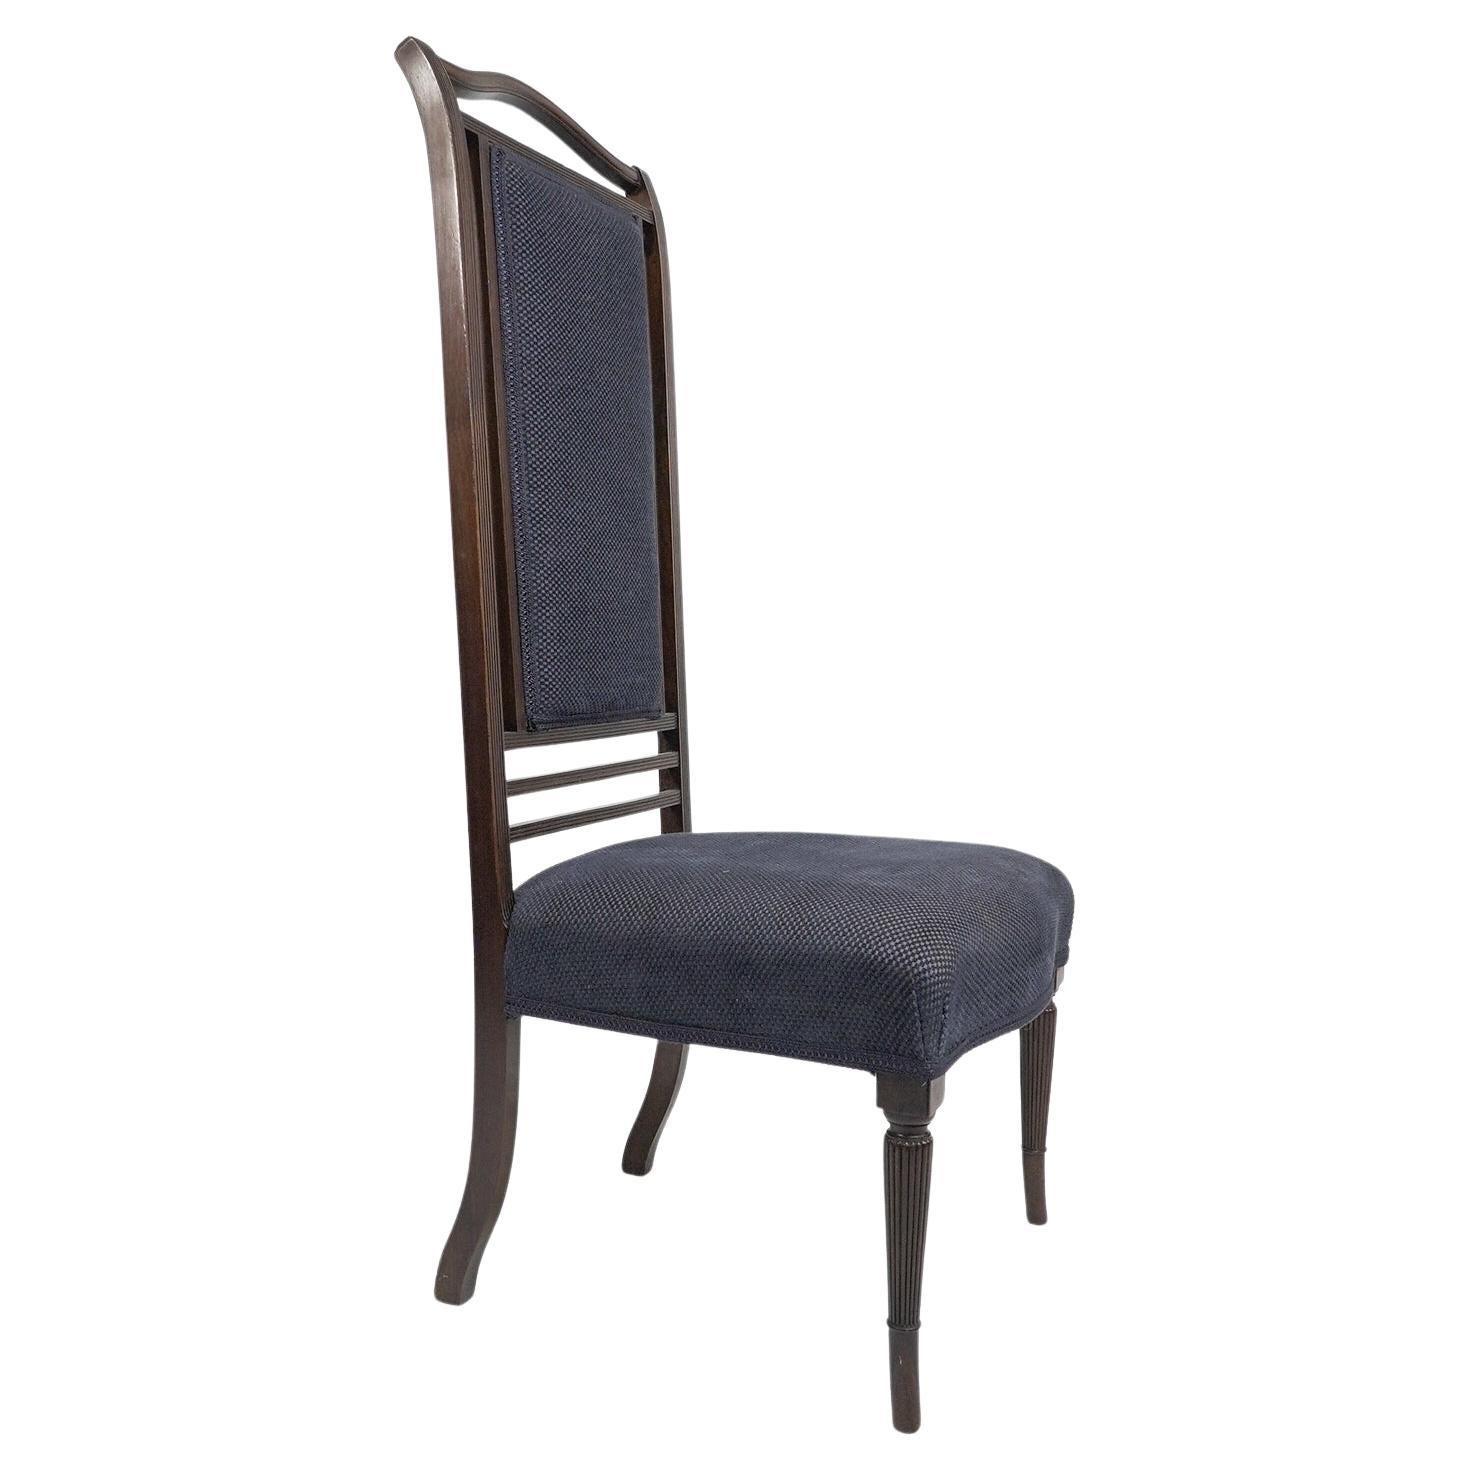 Thomas Edward Collcutt for Collinson & Lock. Aesthetic Movement high back chair. For Sale